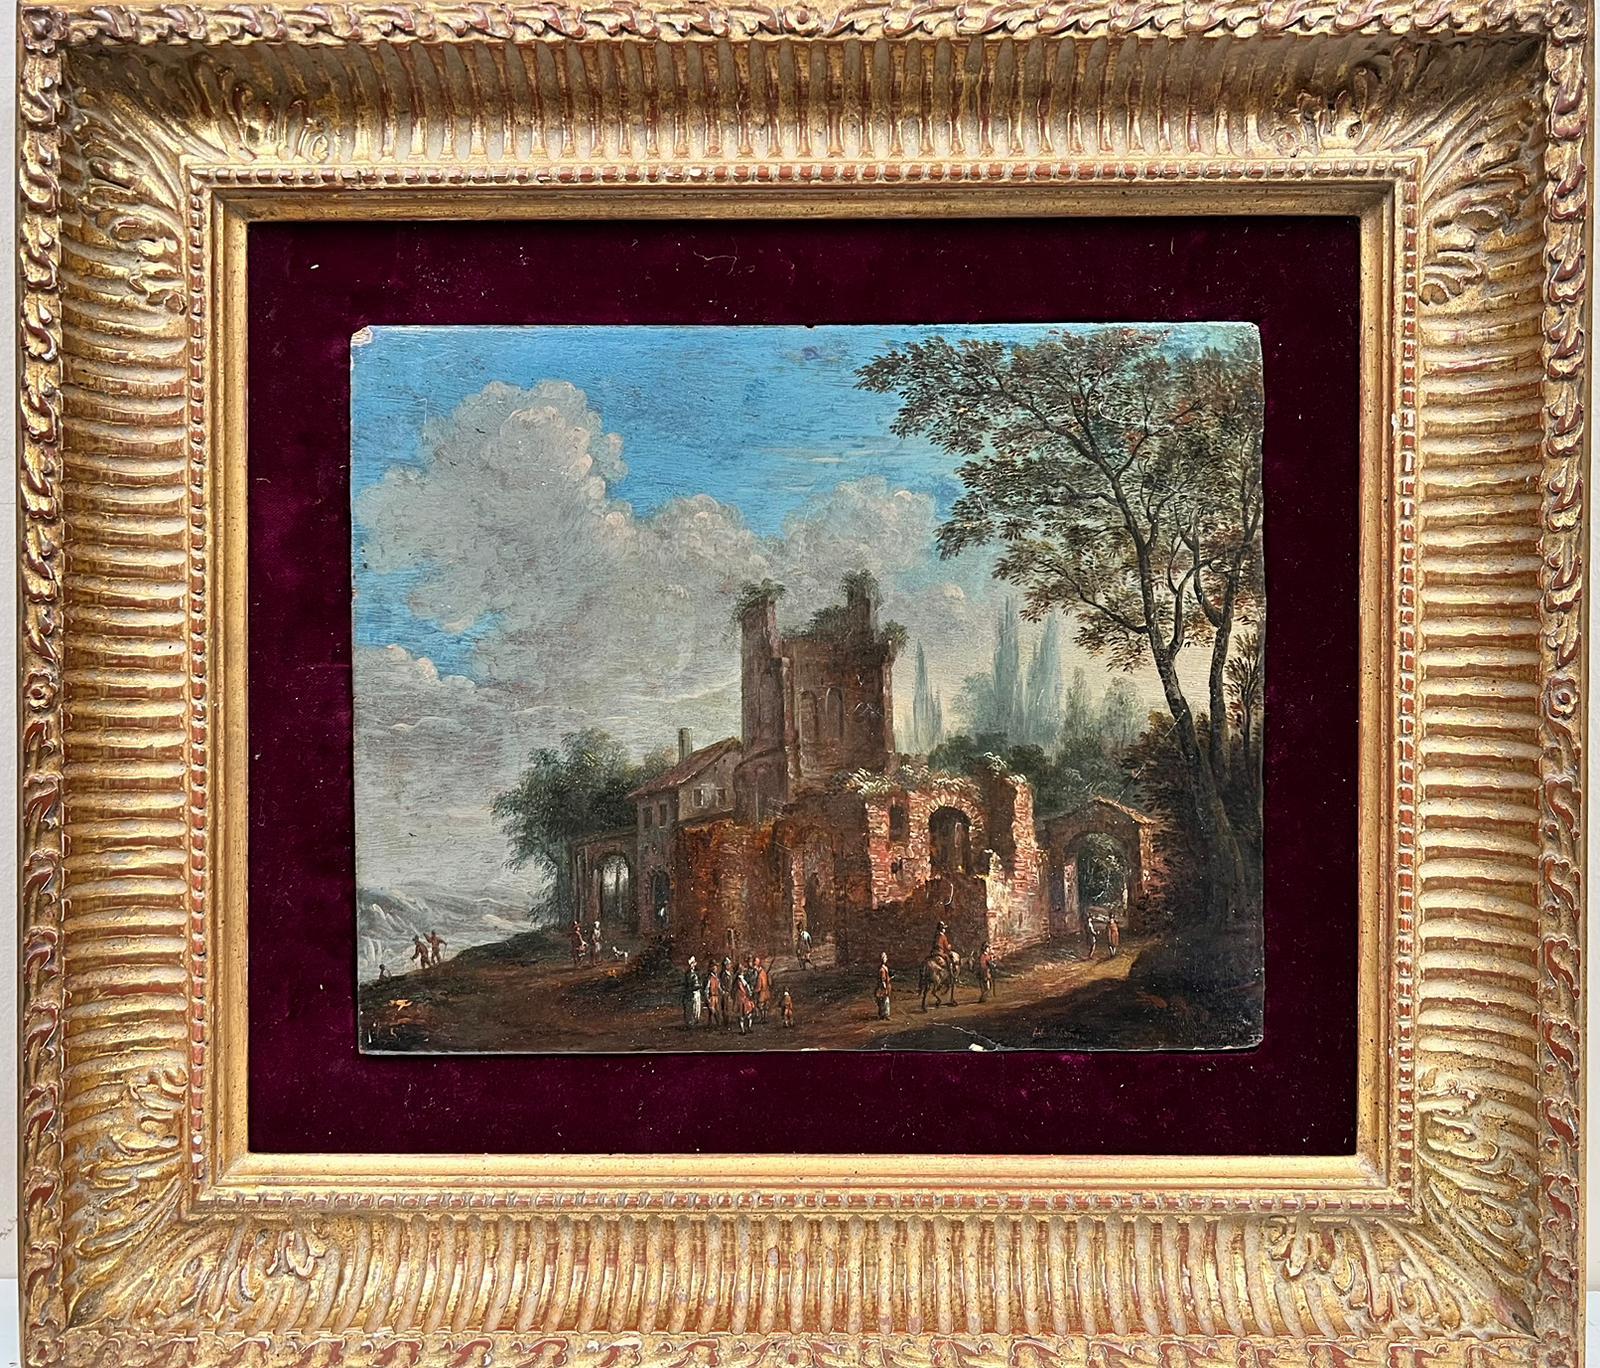 Artist/ School: Dutch School, late 17th century

Title: Figures outside the City Gates

Medium: oil on board, framed

Framed: 18.5 x 21 inches
Painting: 10 x 12 inches

Provenance: private collection, France

Condition: The painting is in overall